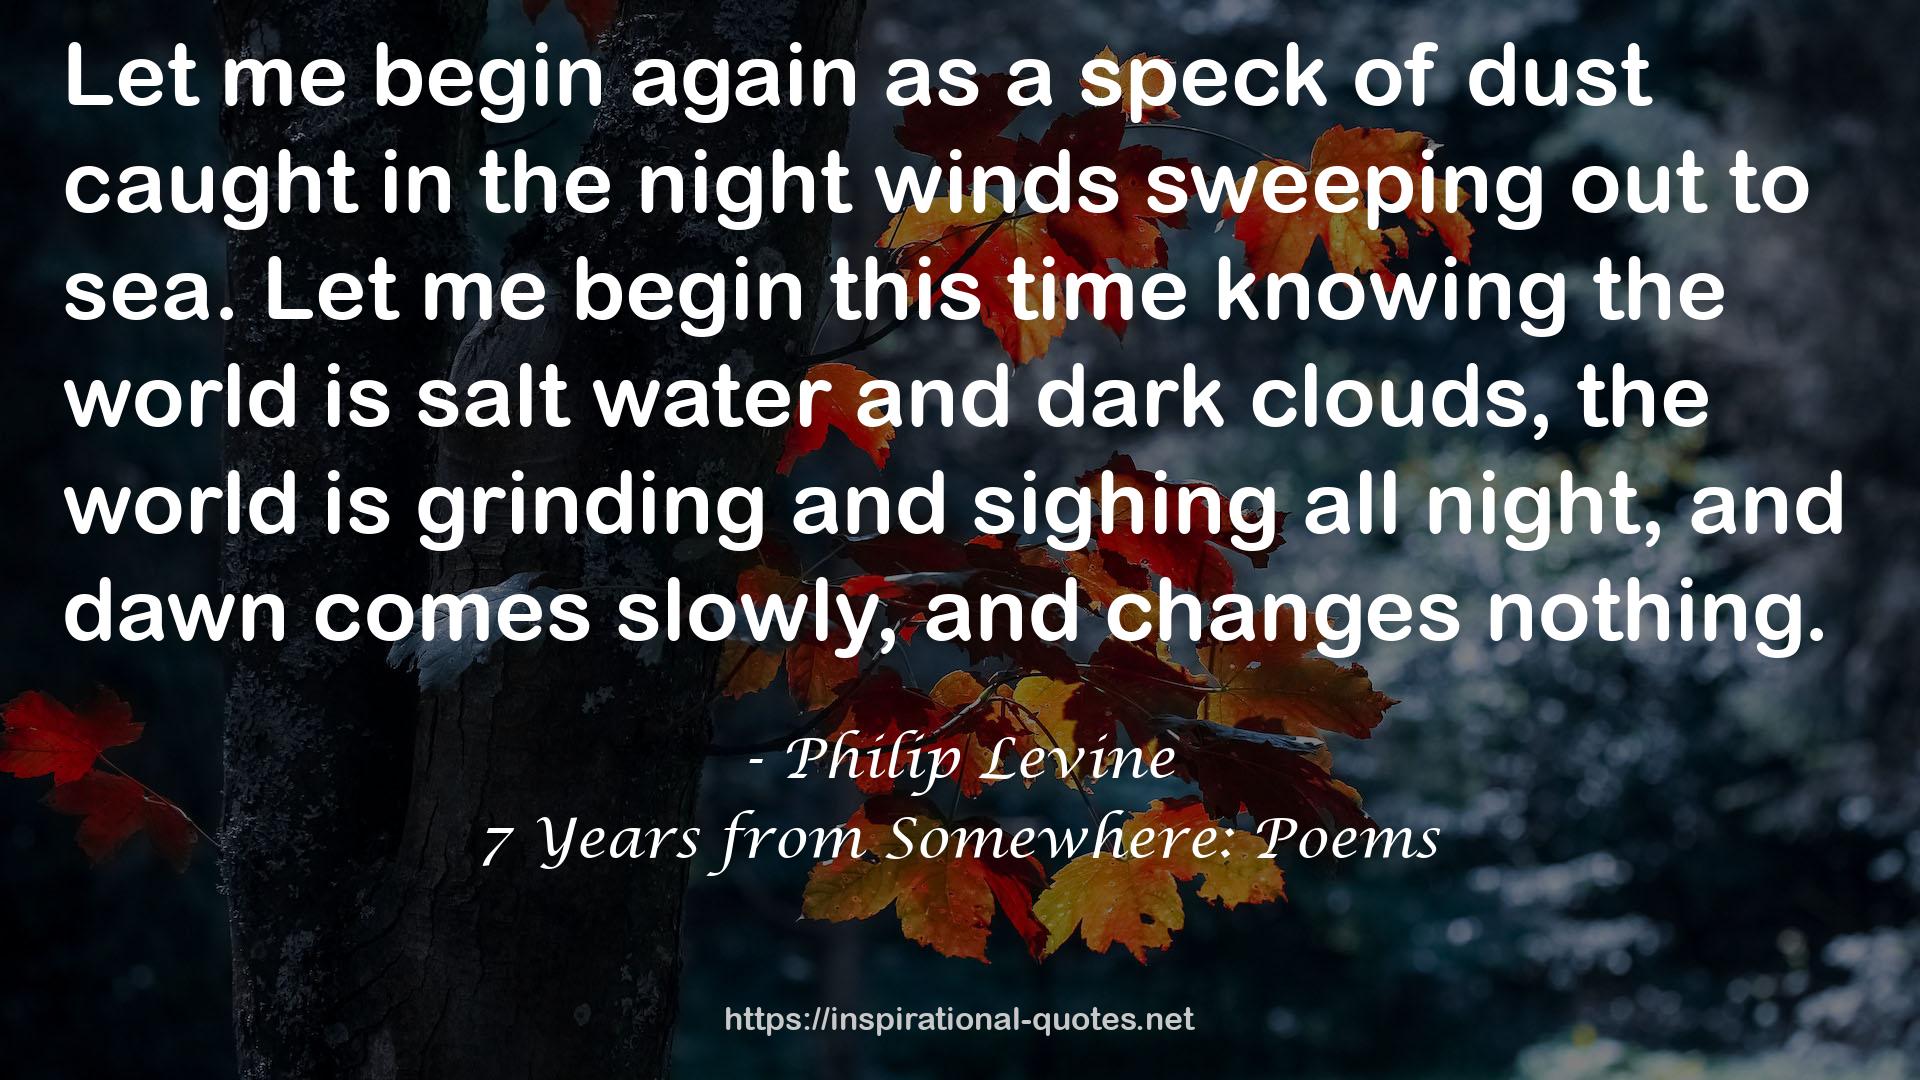 7 Years from Somewhere: Poems QUOTES